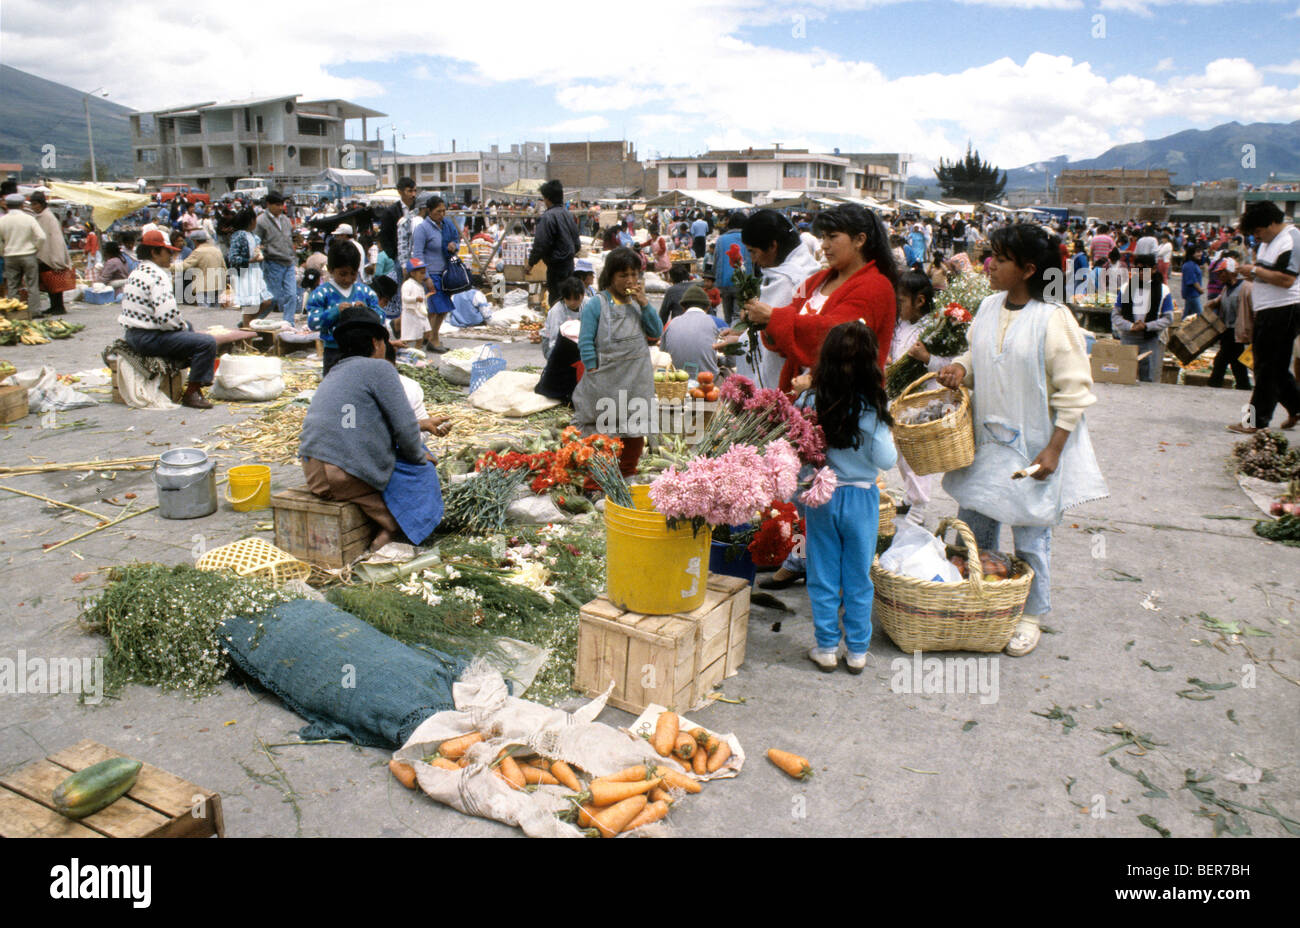 Vegetable and flower seller in local market  upland Ecuador Stock Photo